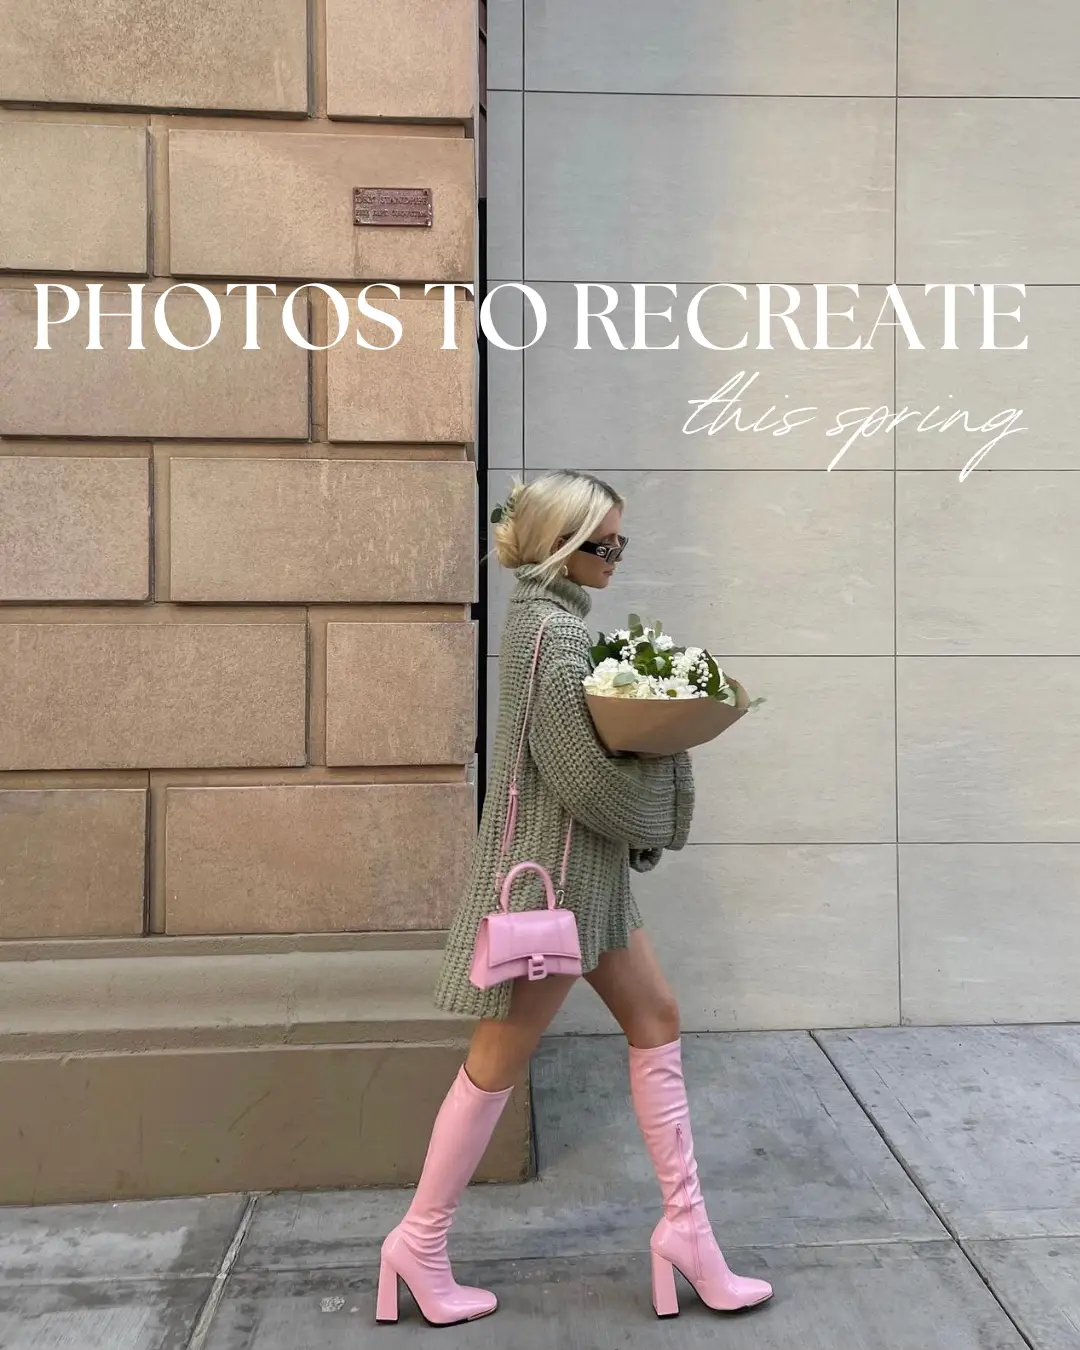  A woman wearing a pink jacket and pink boots is walking down a sidewalk. She is holding a pink purse and is accompanied by a dog. The image is labeled with the words "Photos to Rec